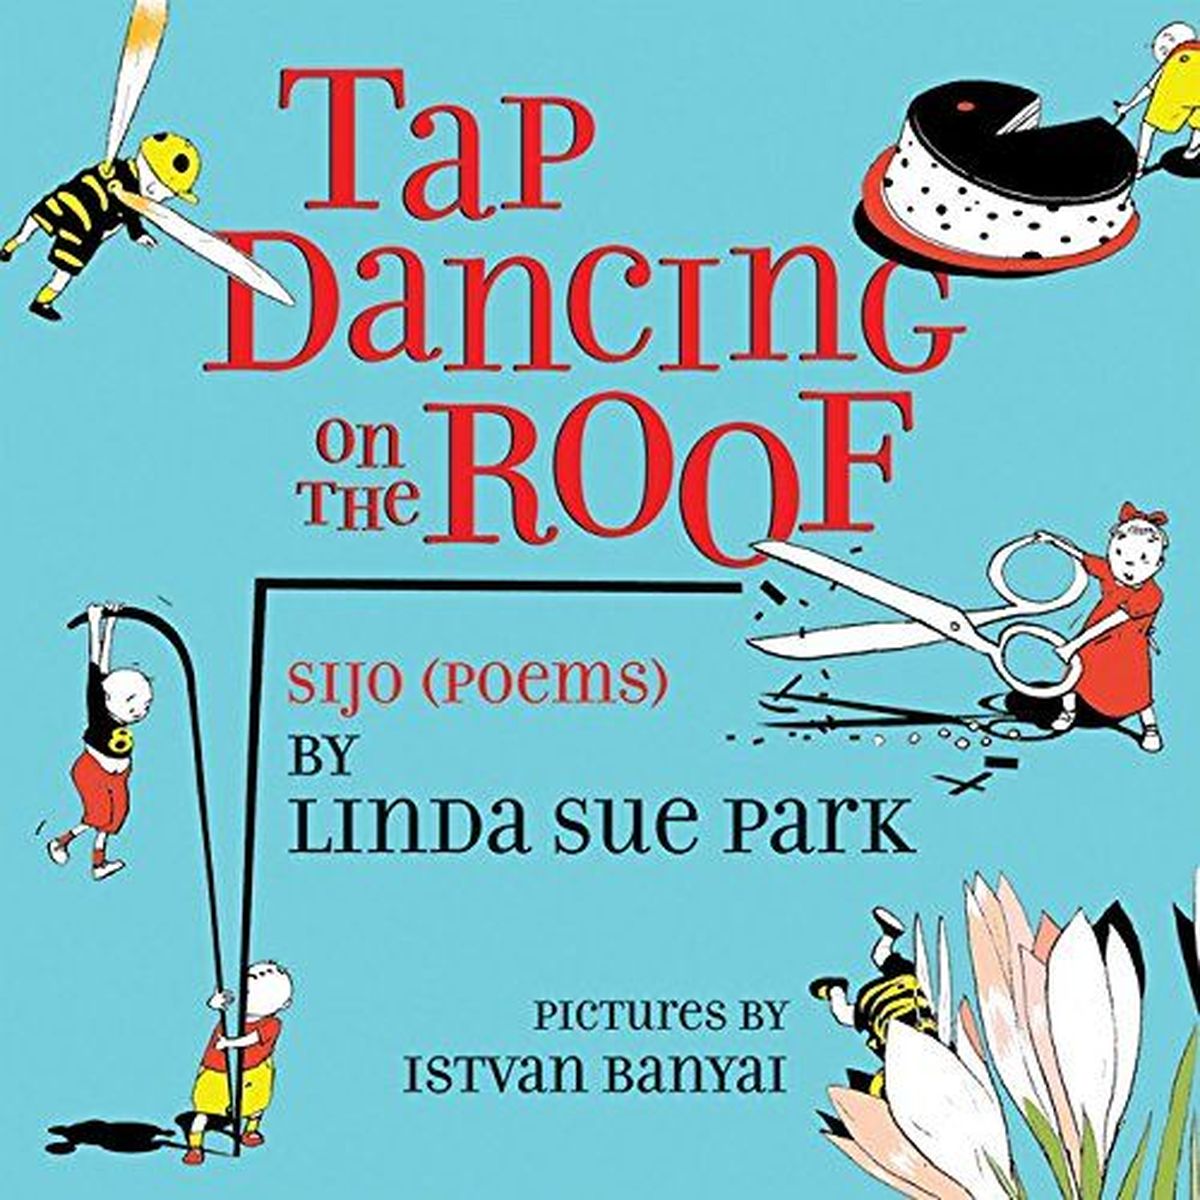 “Tap Dancing on the Roof: Sijo” was written by Linda Sue Park and illustrated by Istvan Banyai. It highlights haiku-like poetry but with a fun twist.  (Clarion Books)